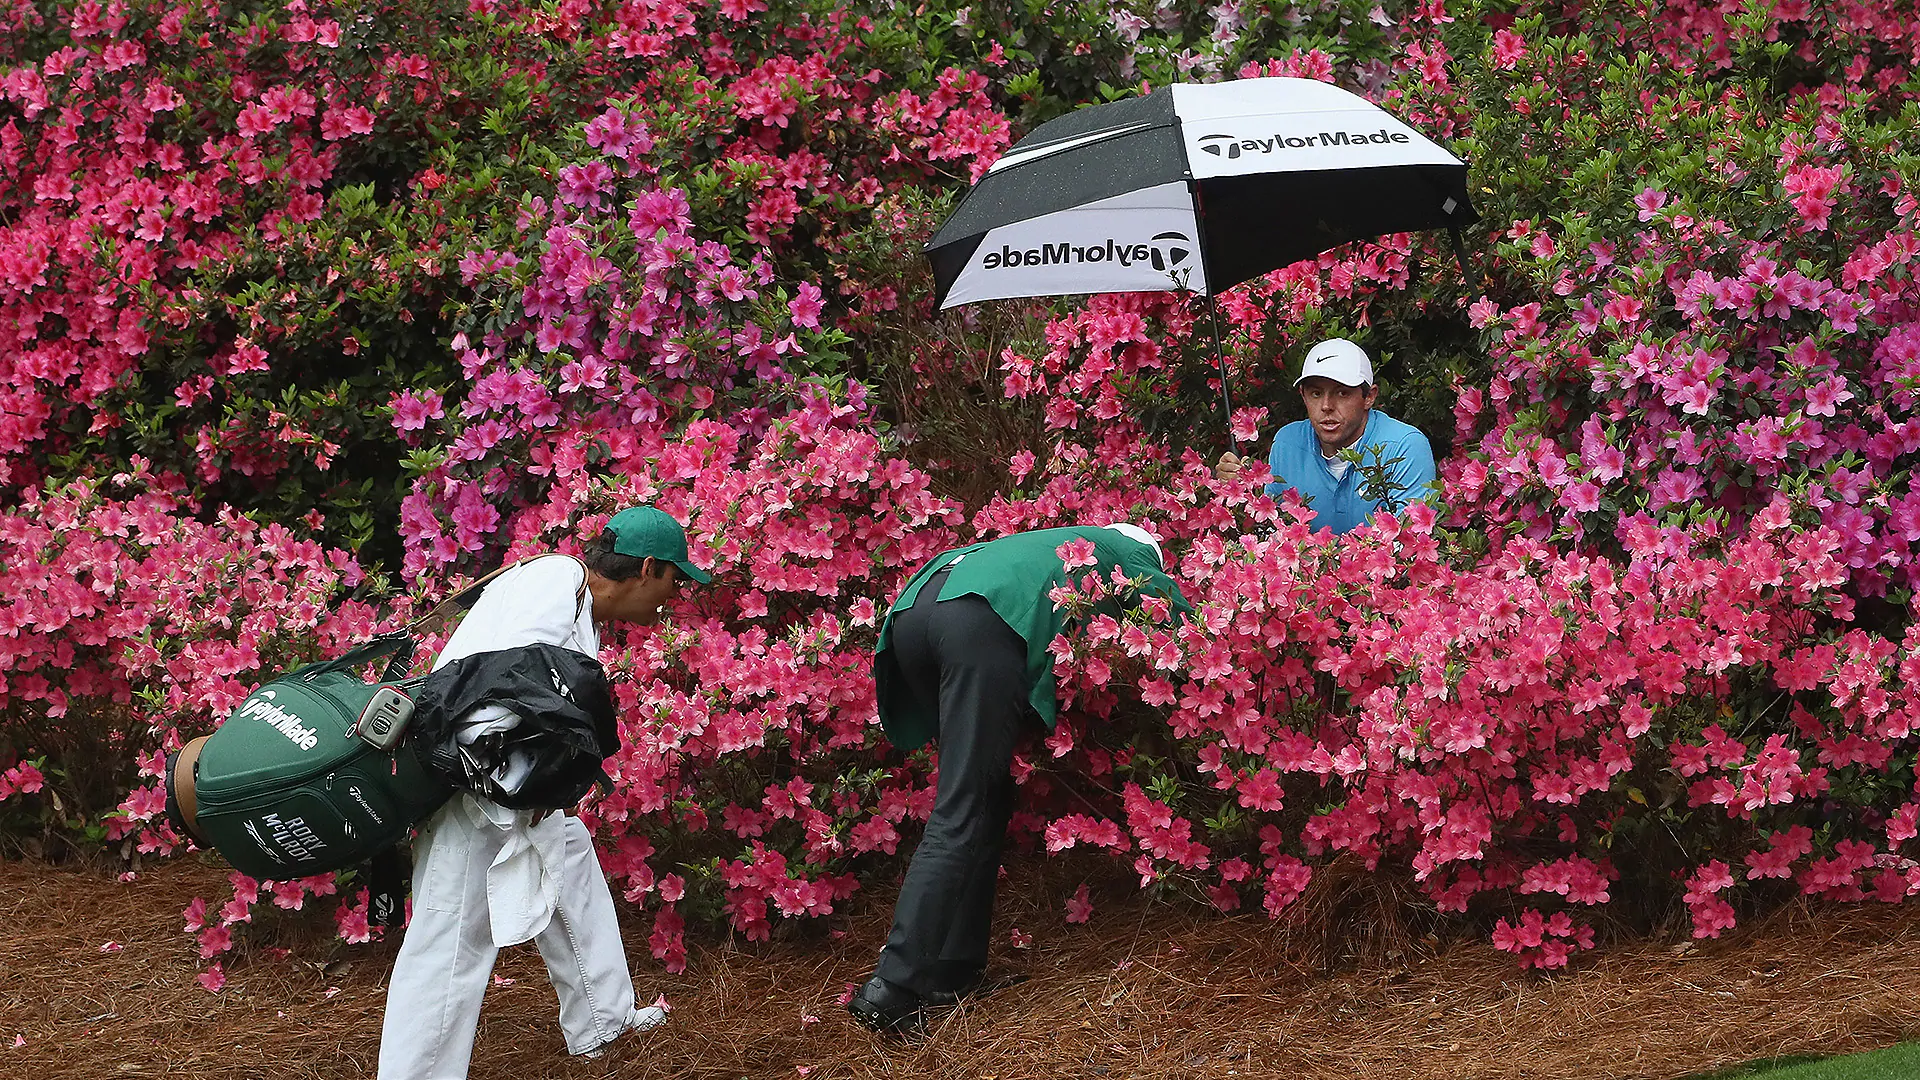 McIlroy survives 'sea of pink' to salvage par at 13